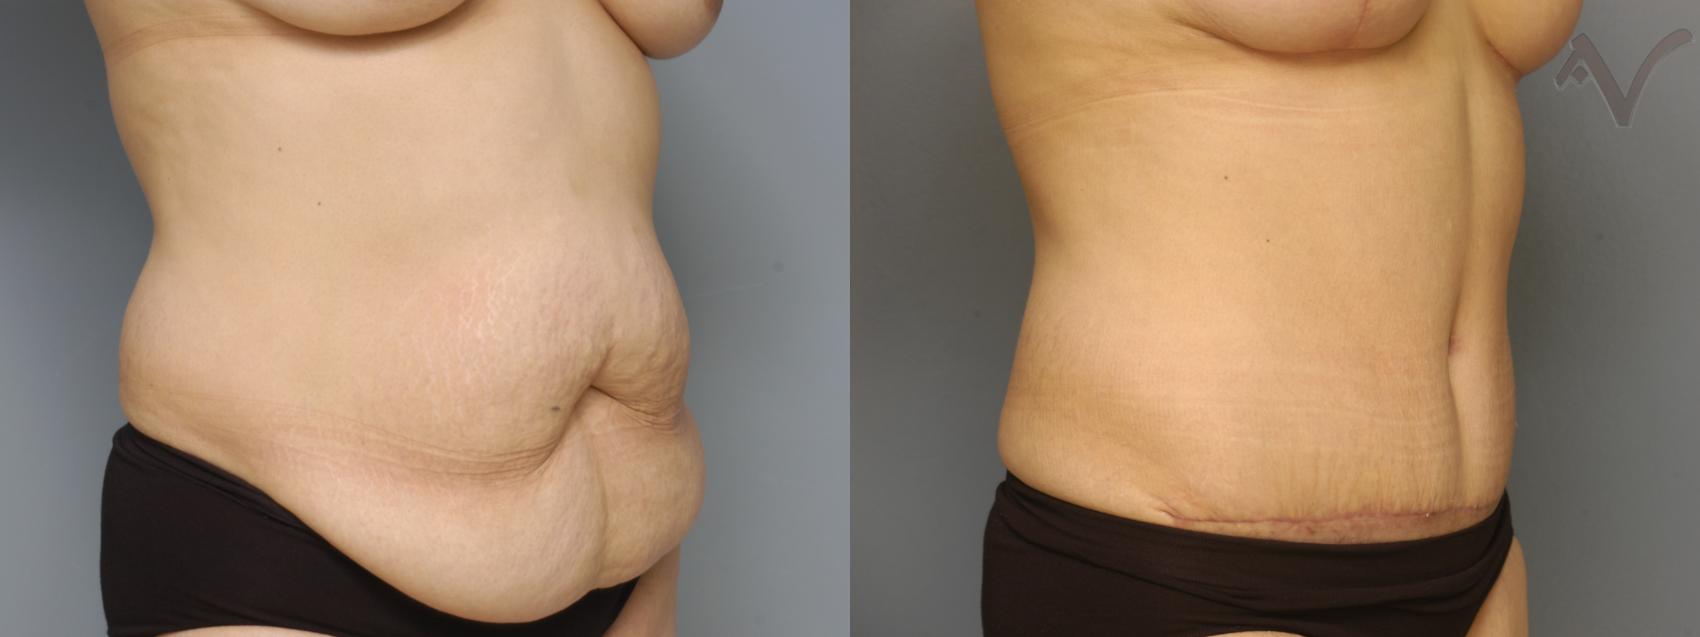 Before & After Tummy Tuck Case 216 Right Oblique View in Los Angeles, CA